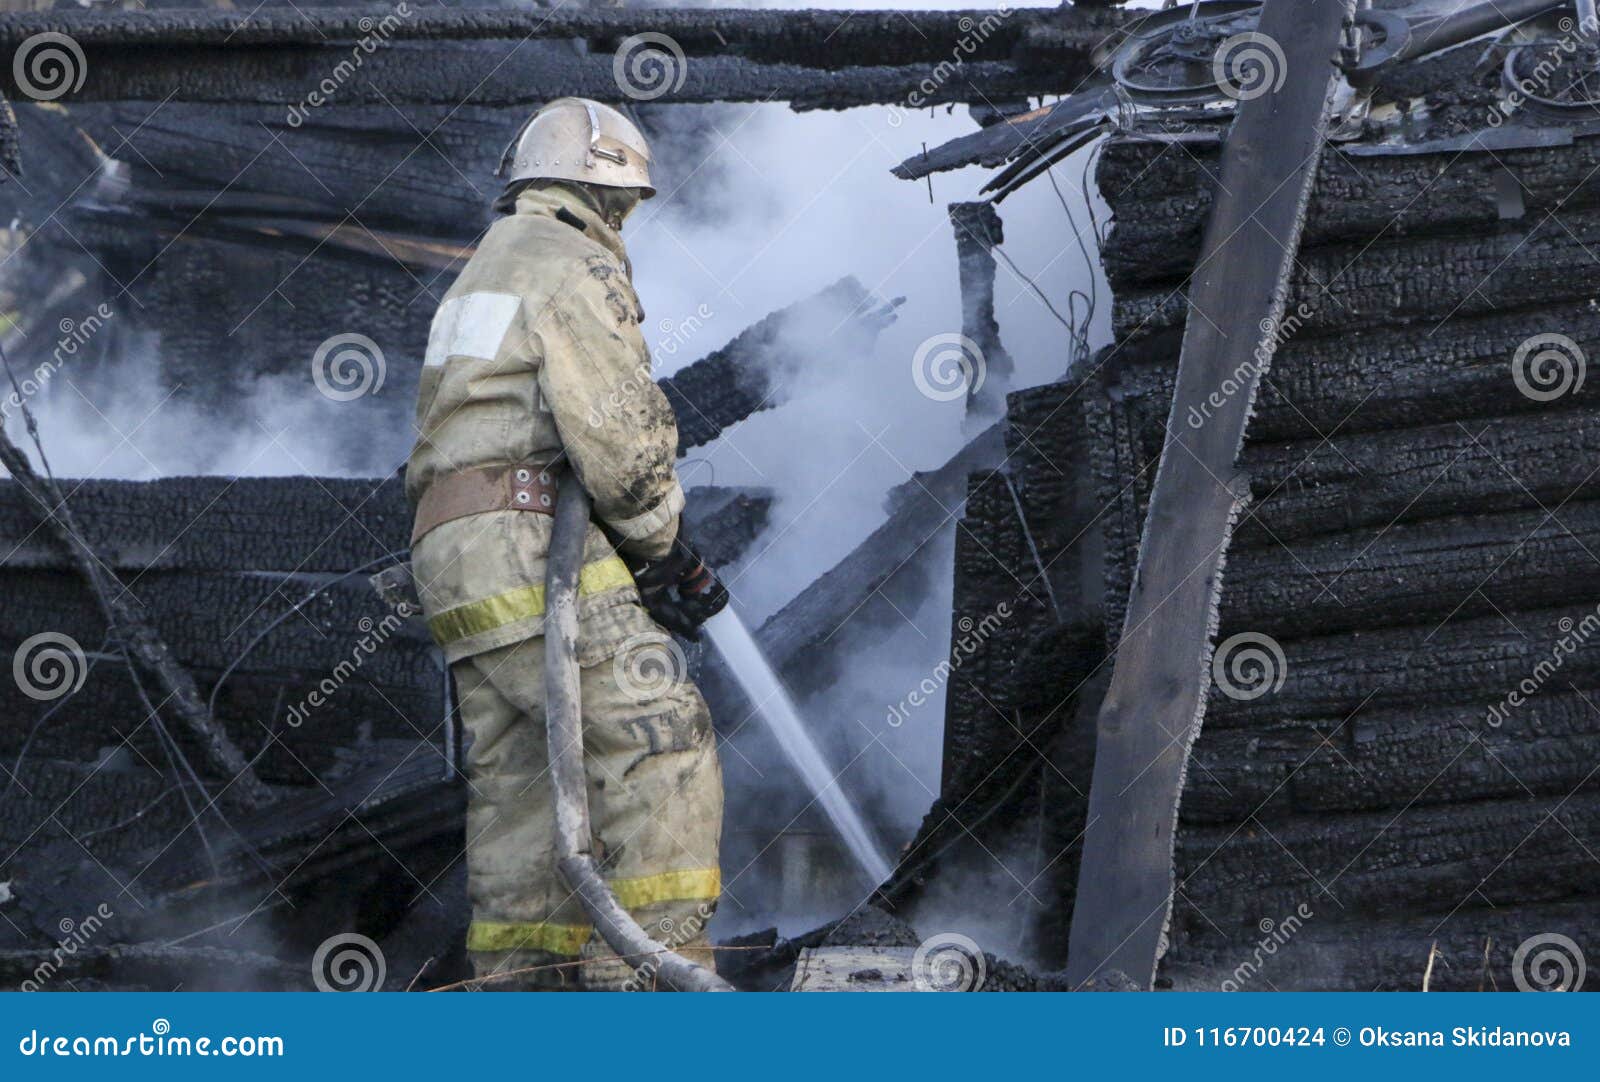 firefighter extinguishes the fire. fireman holding hose with water, watering strong stream of burning wooden structure in smoke.